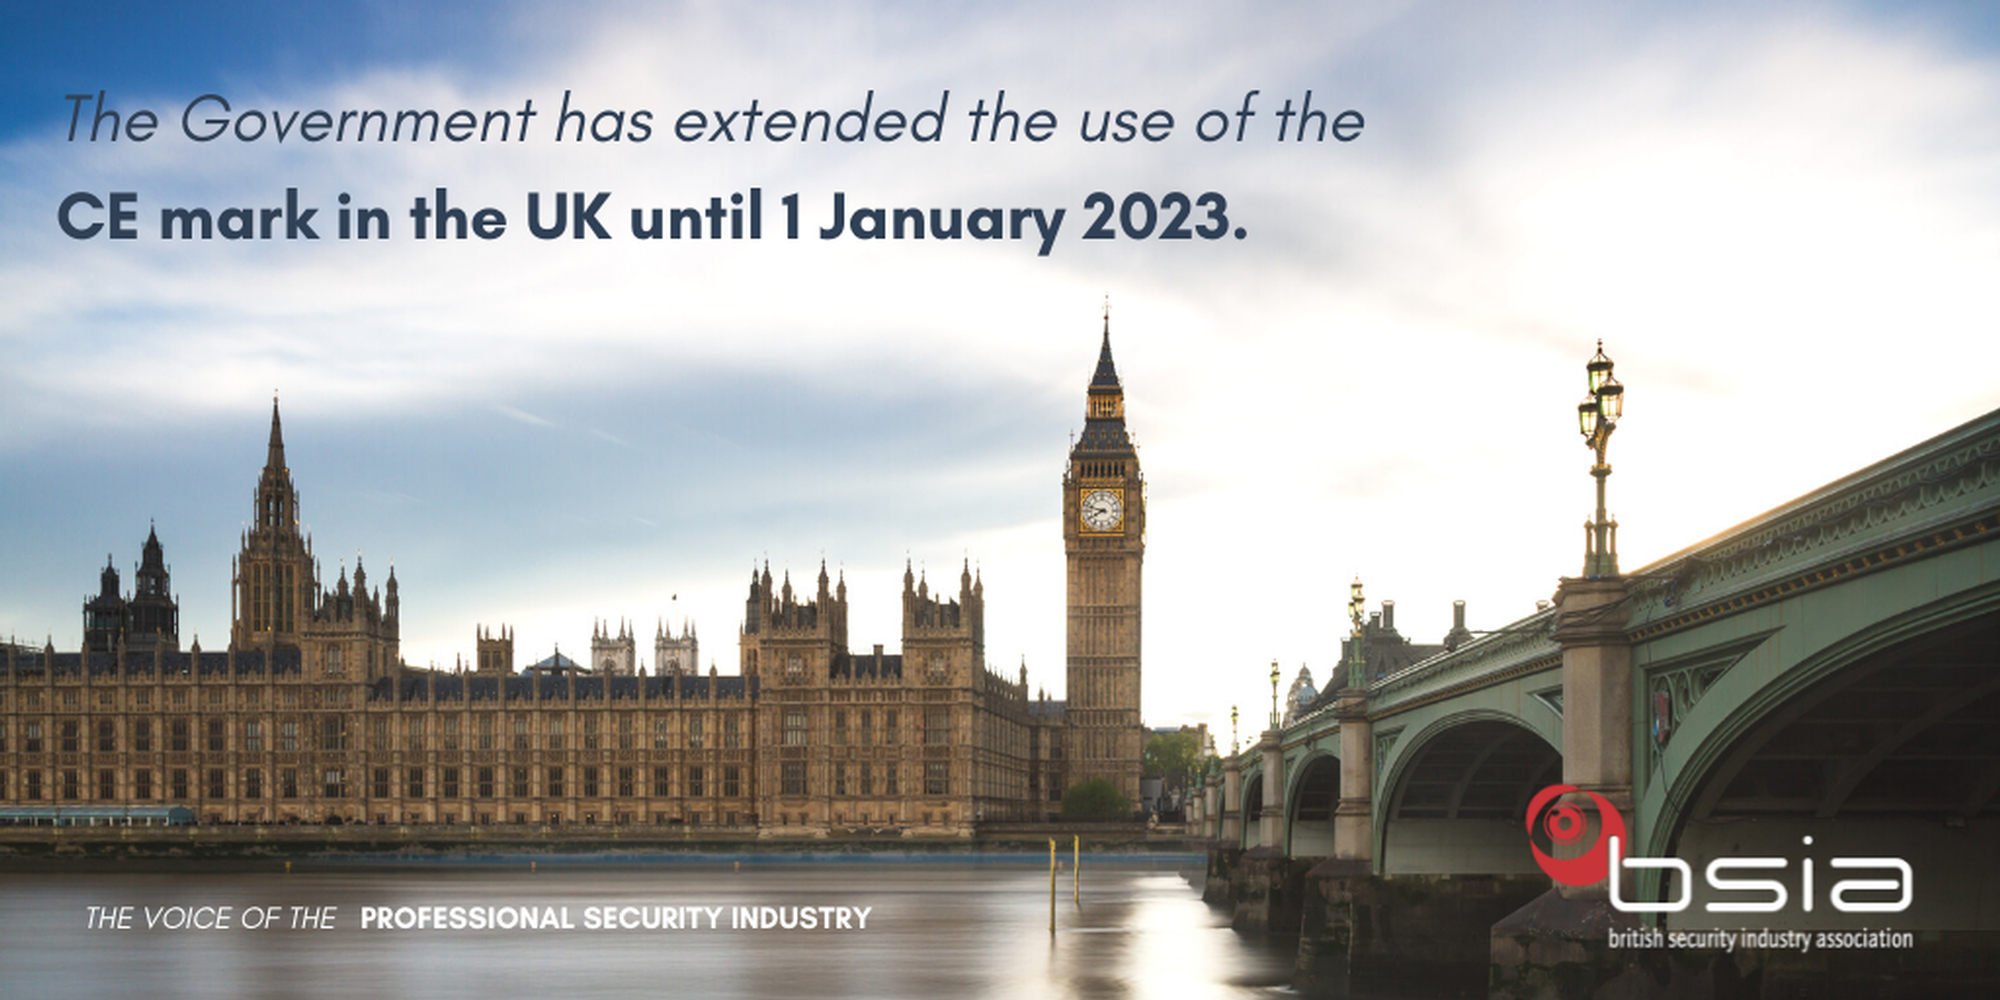 The Government has extended the use of the CE mark in the UK until 1 January 2023